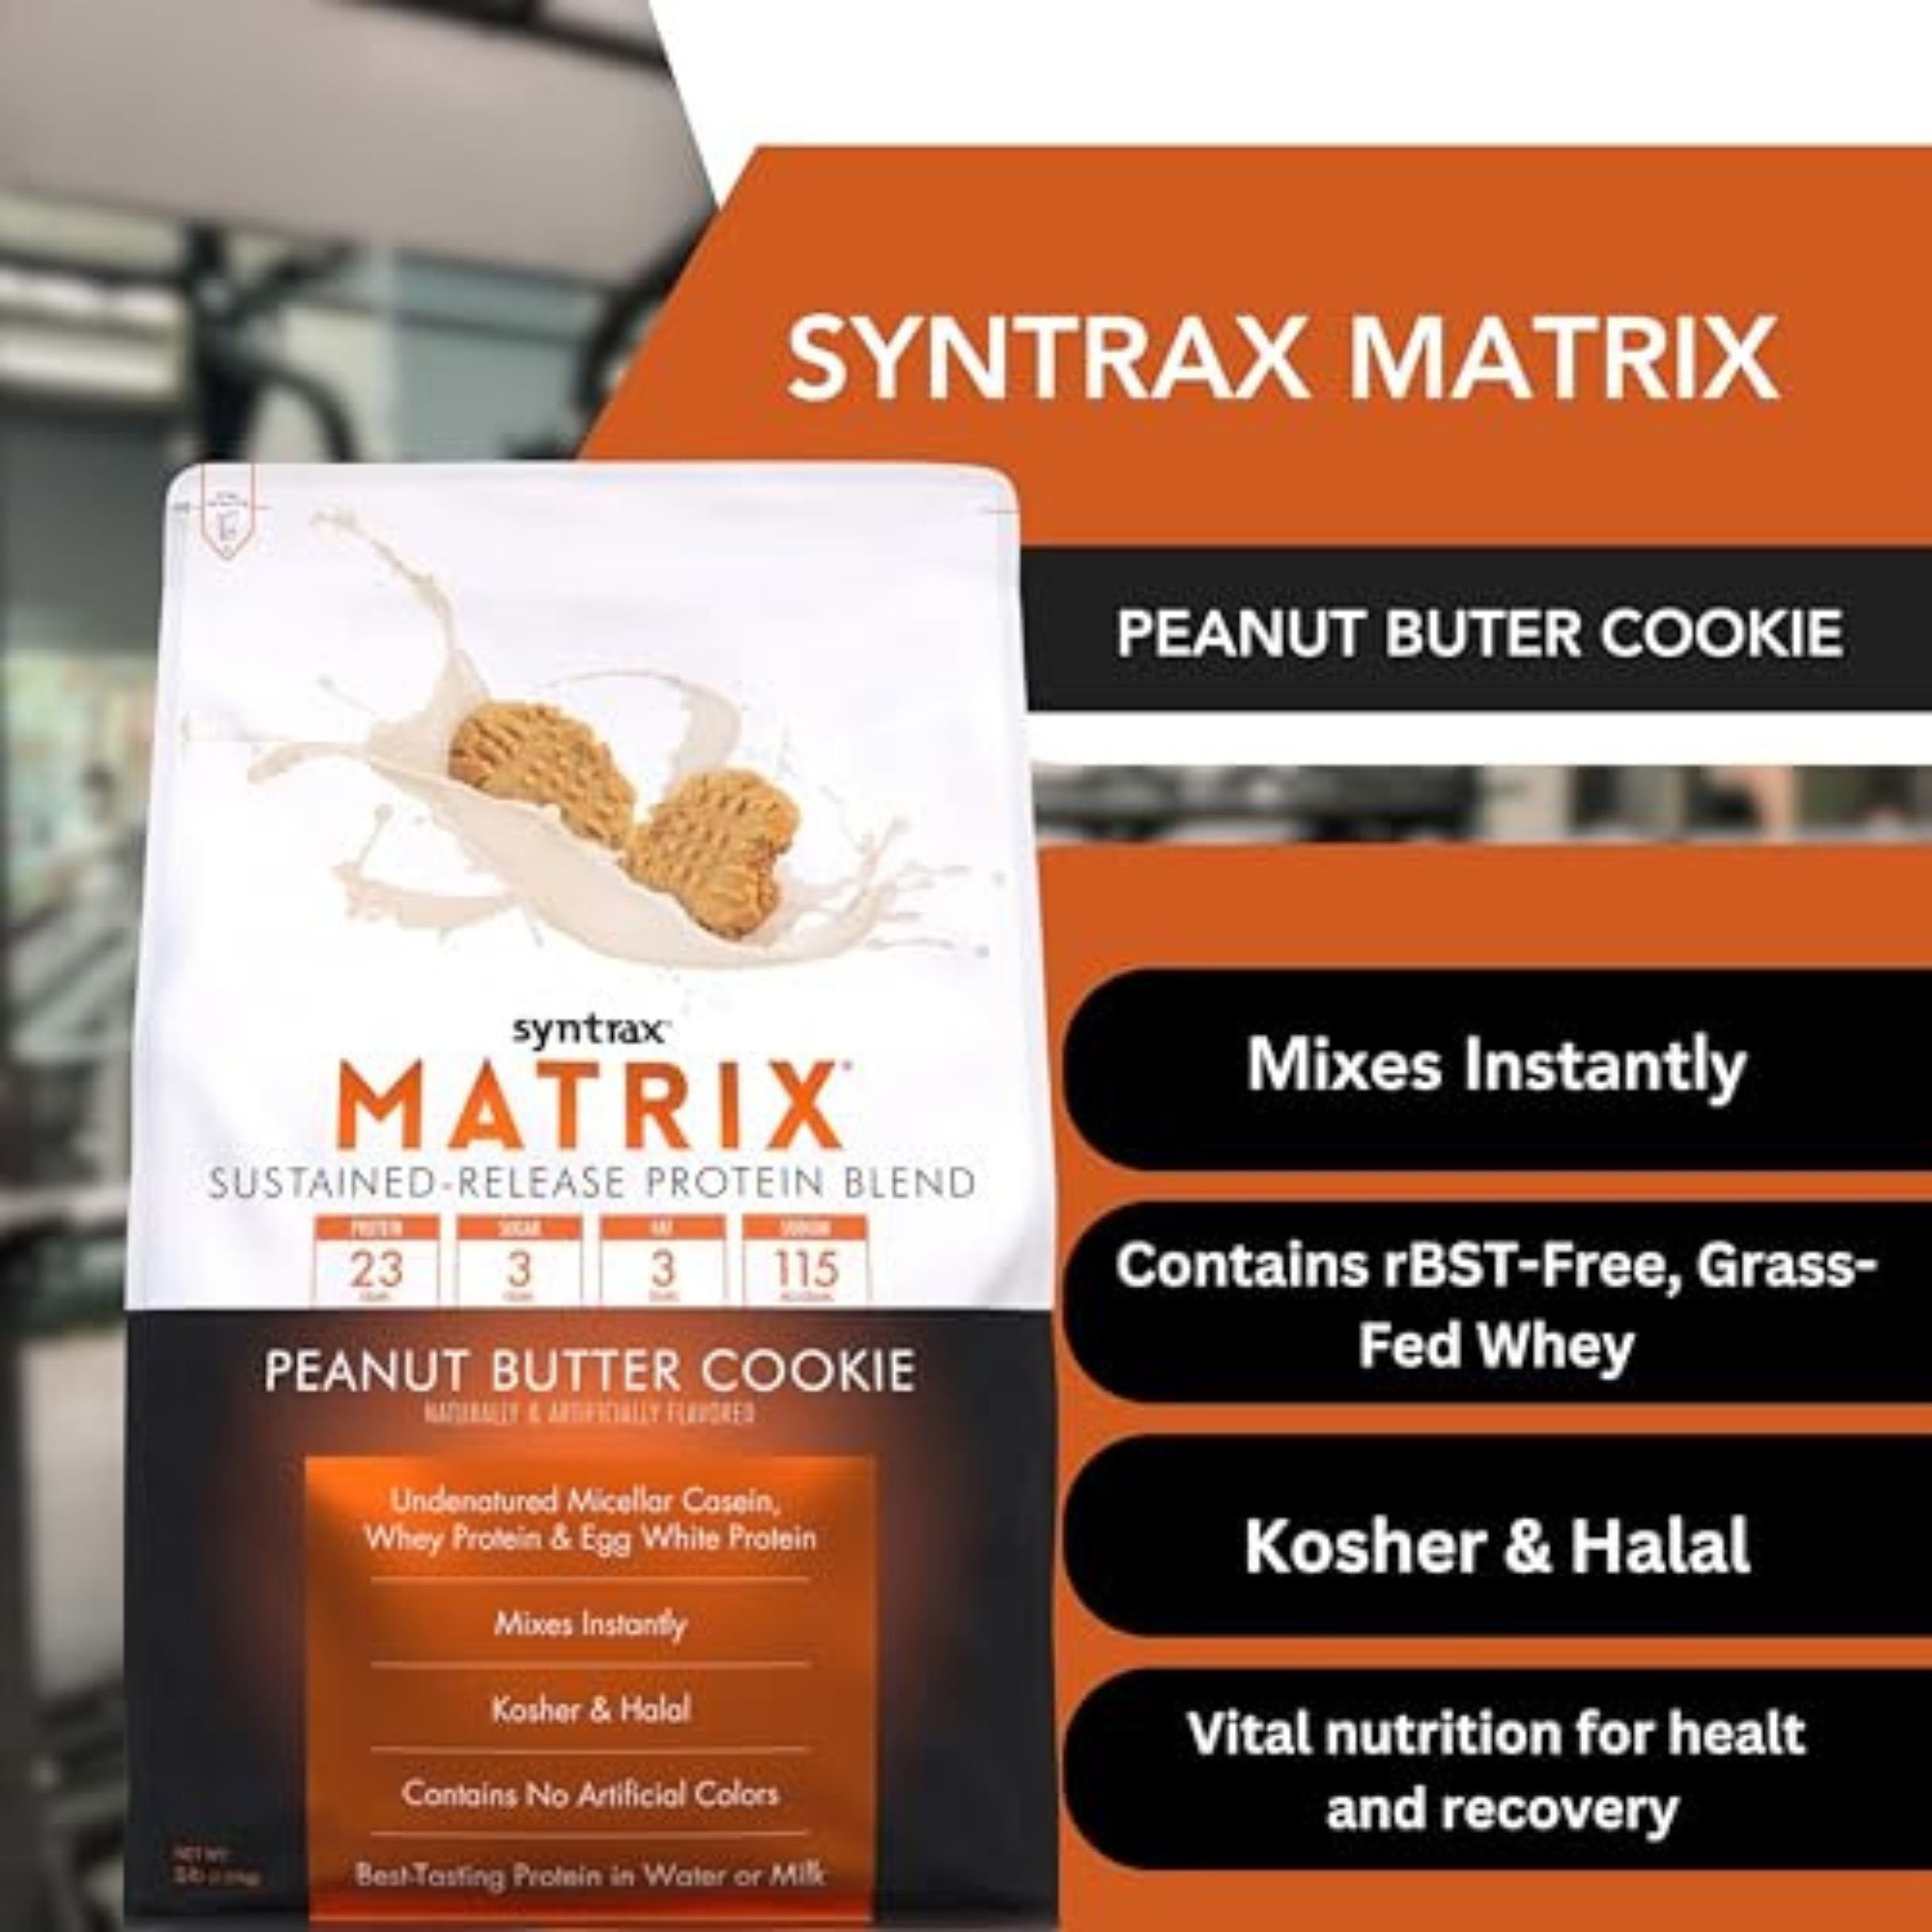 Syntrax Bundle, 2 Items Matrix Protein Powder 5.0 Sustained-Release Whey Protein Powder Blend - Instant Mix Protein Powder Peanut Butter Cookie, 5 Pounds with Worldwide Nutrition Keychain